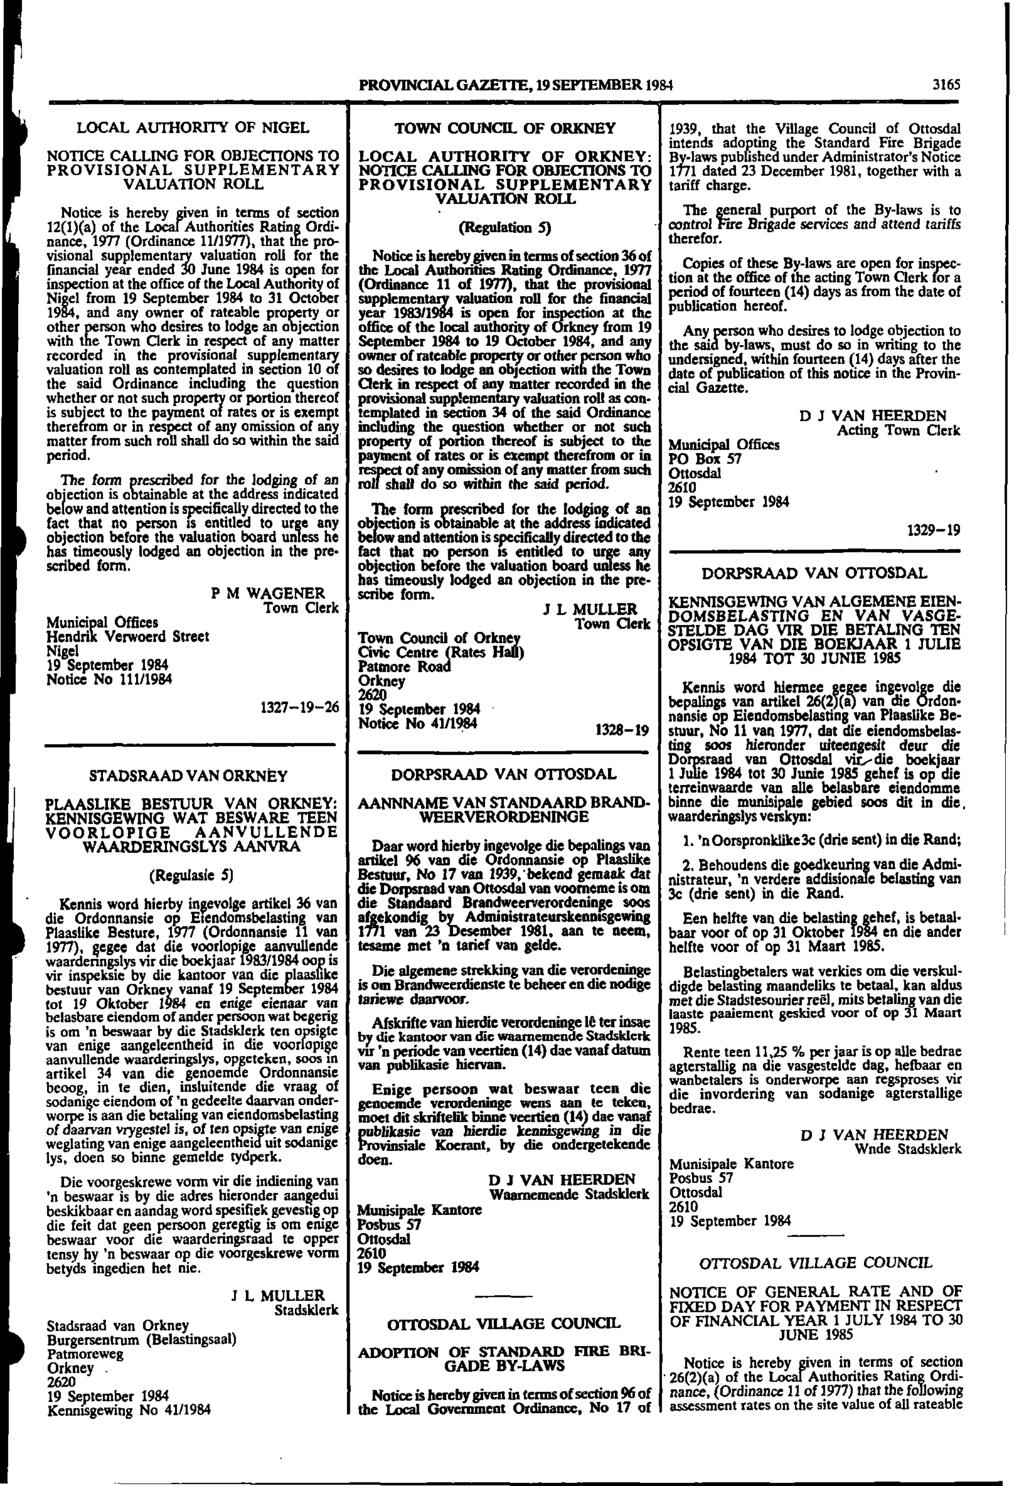 PROVINCIAL GAZETTE, 19 SEPTEMBER 198 3165 LOCAL AUTHORITY OF NIGEL TOWN COUNCIL OF ORKNEY 1939, that the Village Council of Ottosdal intends adopting the Standard Fire Brigade NOTICE CALLING FOR